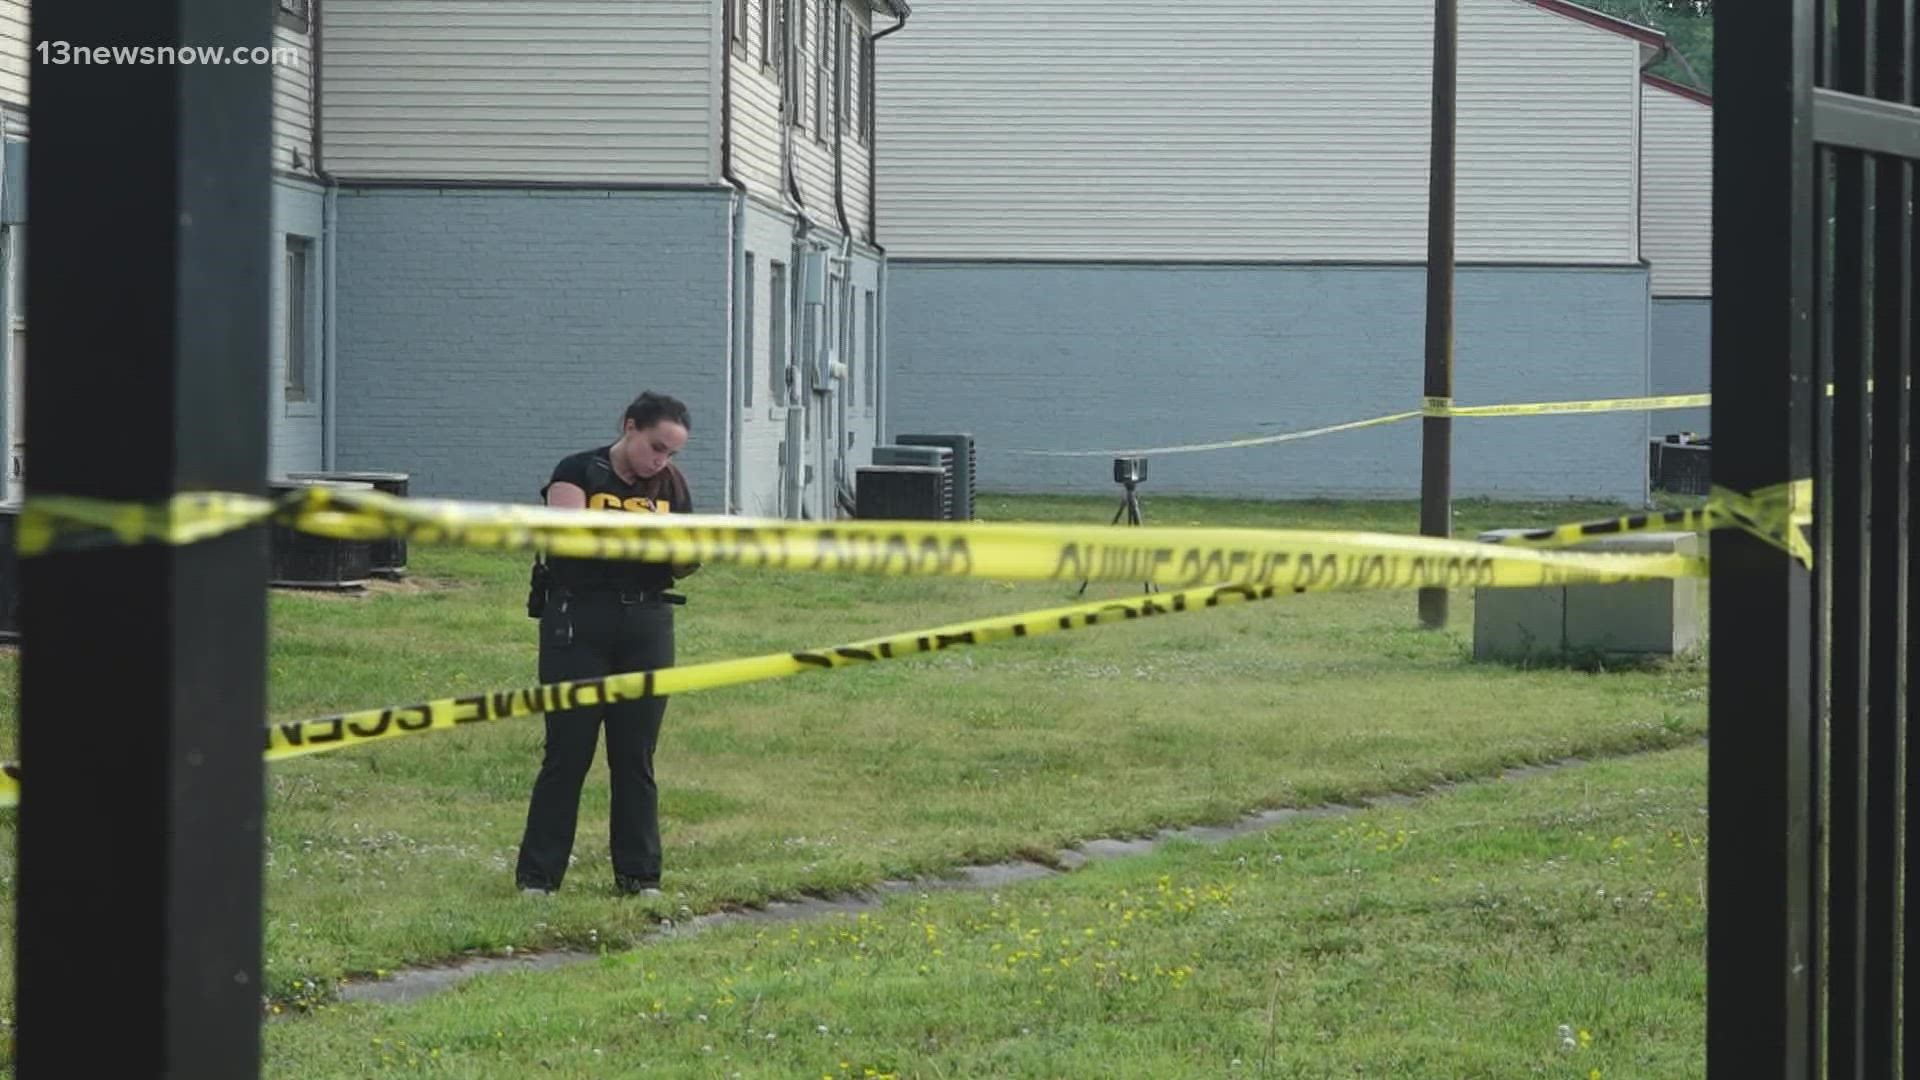 Investigators believe that this shooting may be connected to a separate shooting that happened at the same complex on April 26.